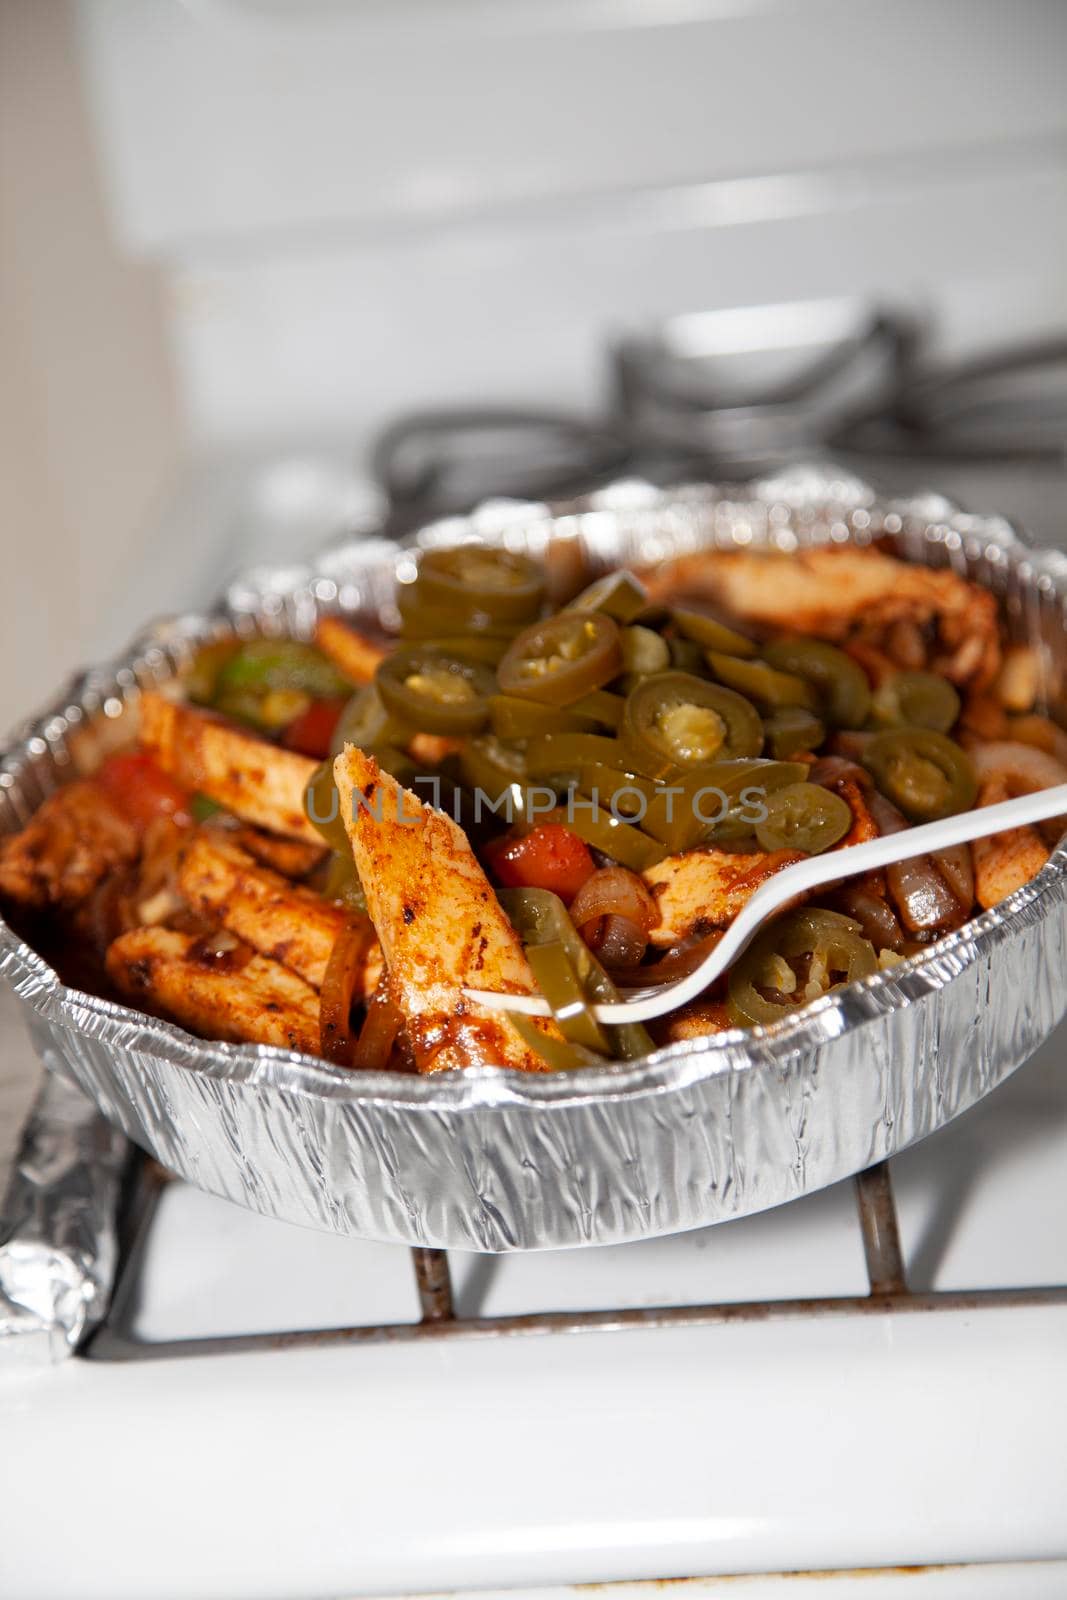 Stir fried chicken in a serving tin with jalapenos, roasted green bell peppers, roasted onions, and roasted red peppers